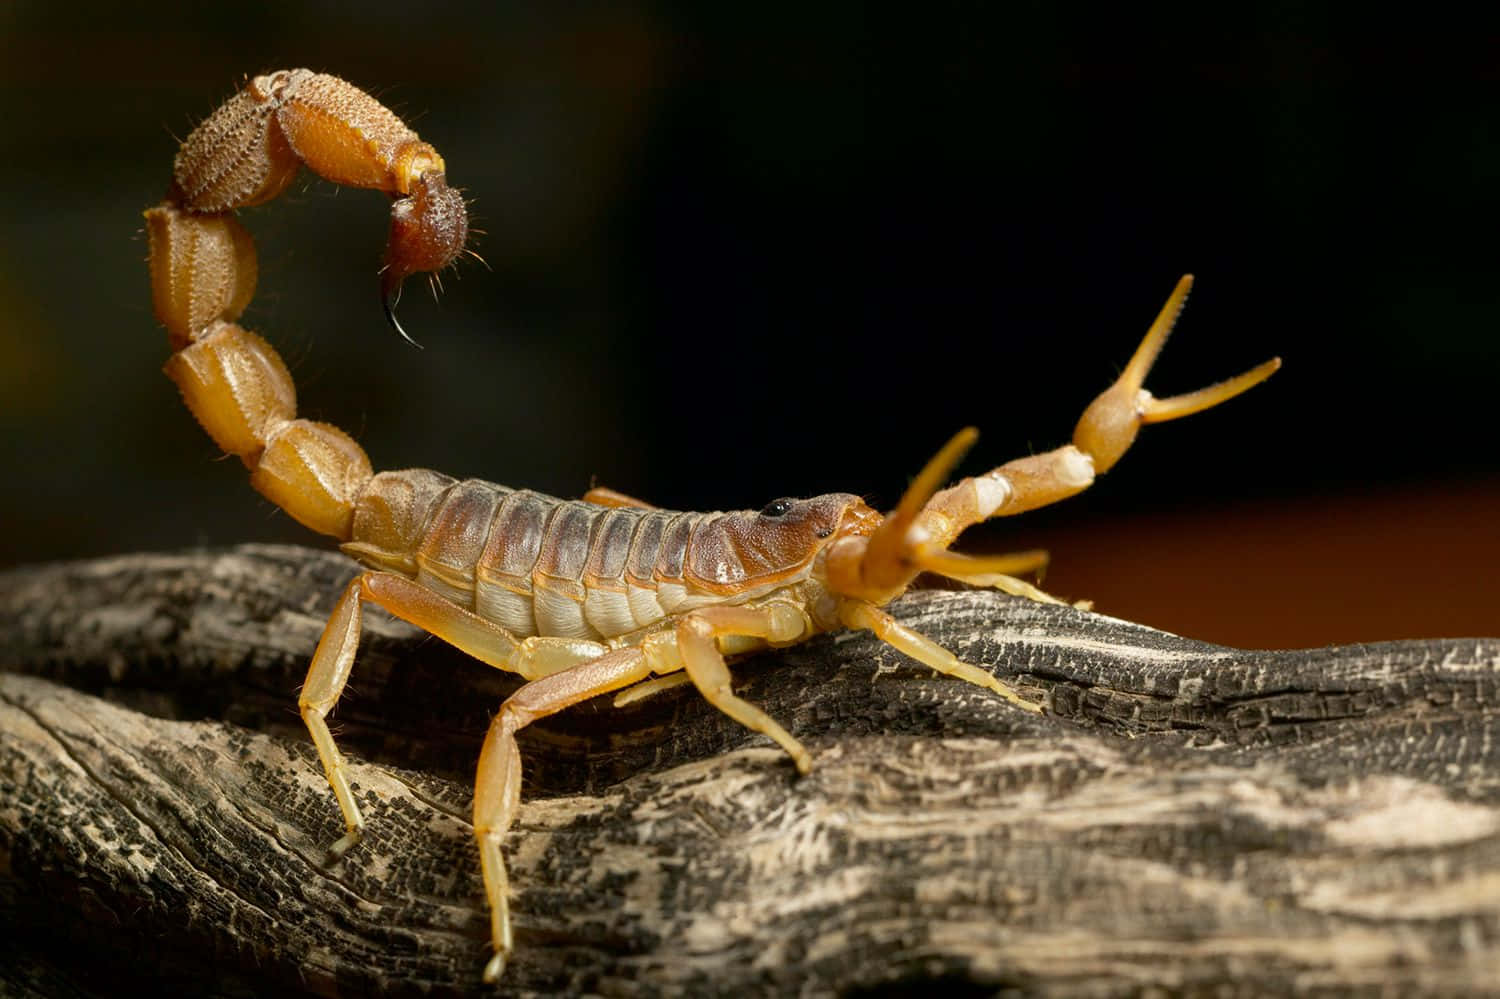 "The Deadly Look of a Scorpion"